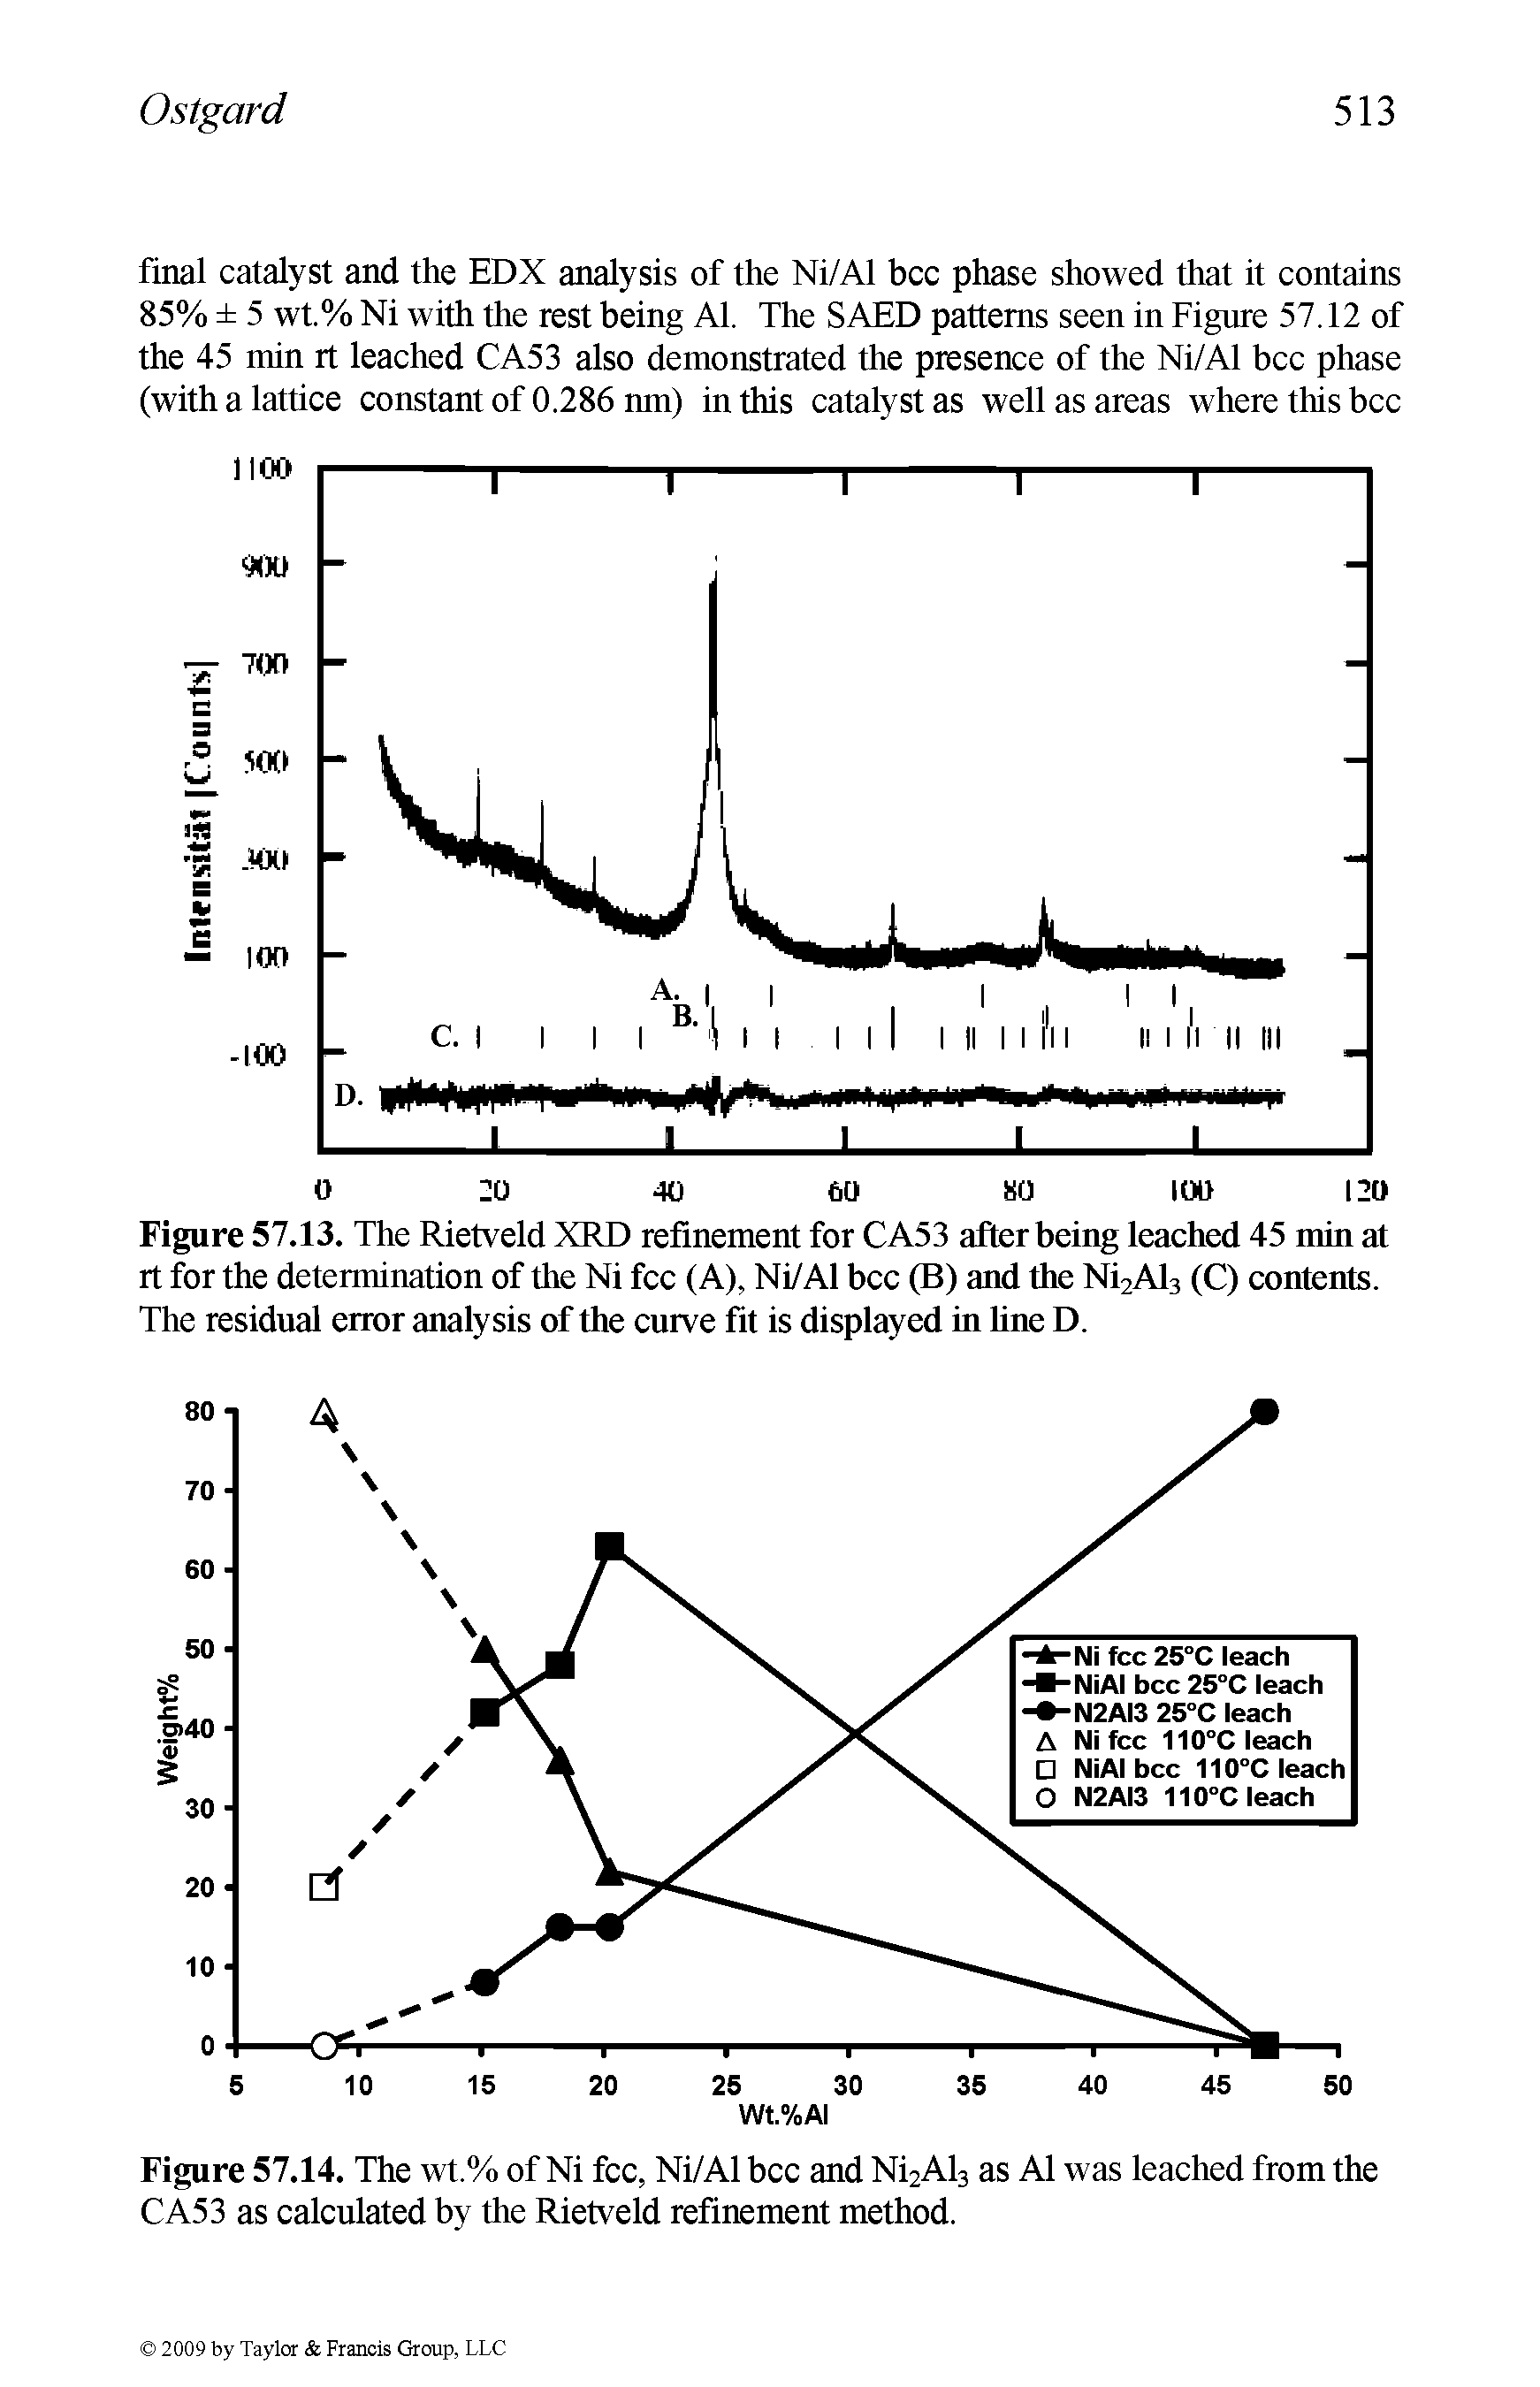 Figure 57.13. The Rietveld XRD refinement for CA53 after being leached 45 min at rt for the determination of the Ni fee (A), Ni/Al bcc (B) and the Ni2Al3 (C) contents. The residual error analysis of the curve fit is displayed in hne D.